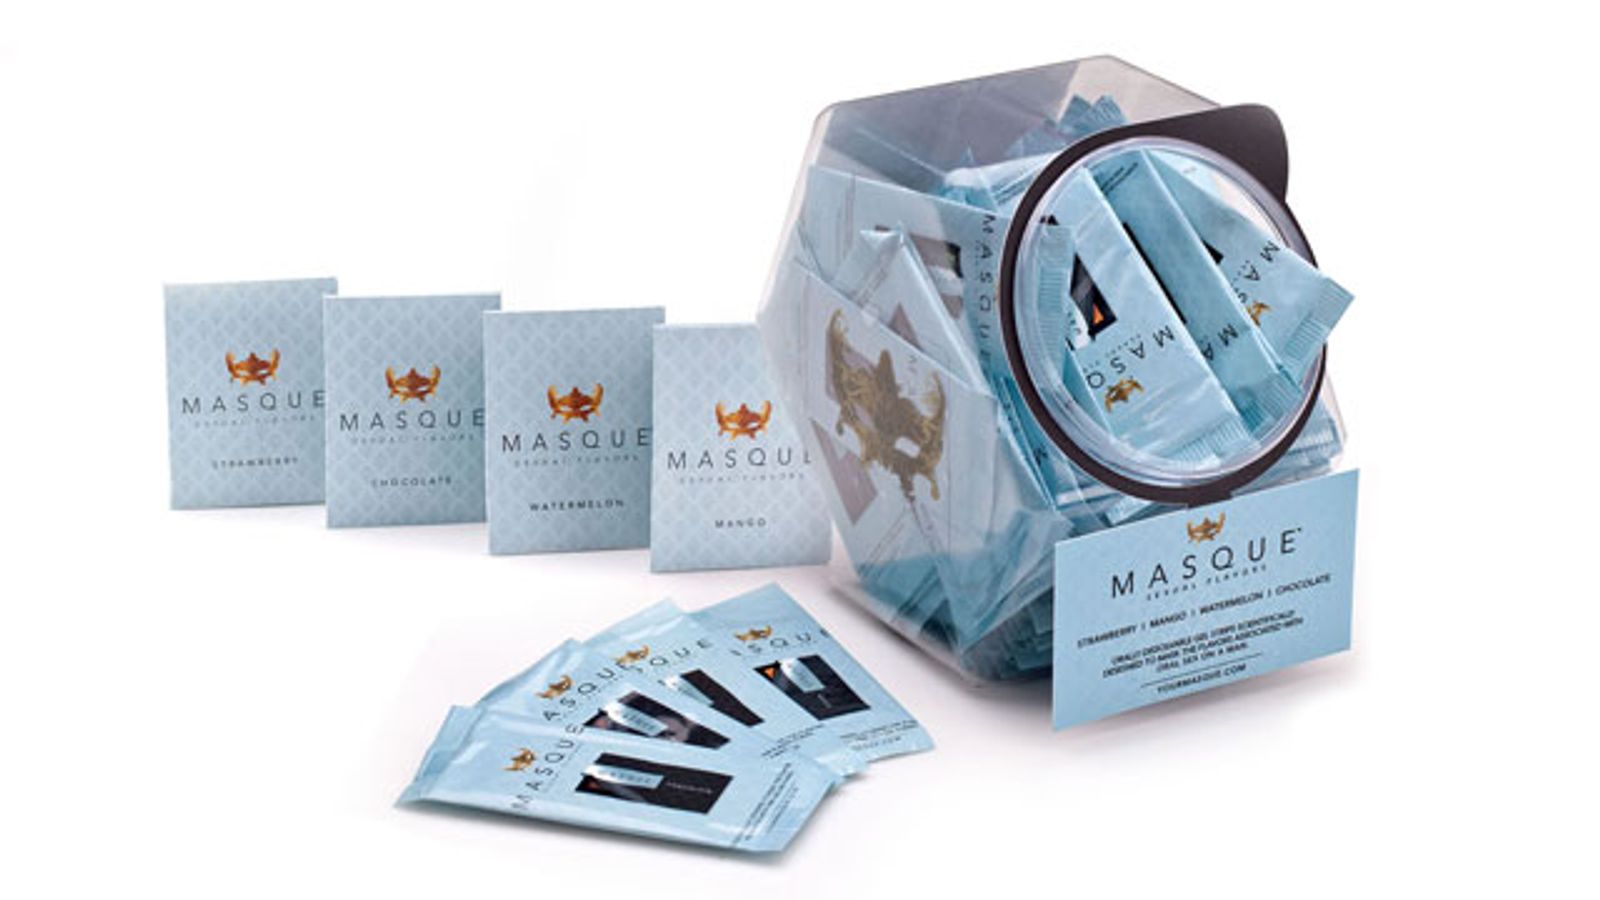 Masque Sexual Flavors Heads to Europe for eroFame and Venus